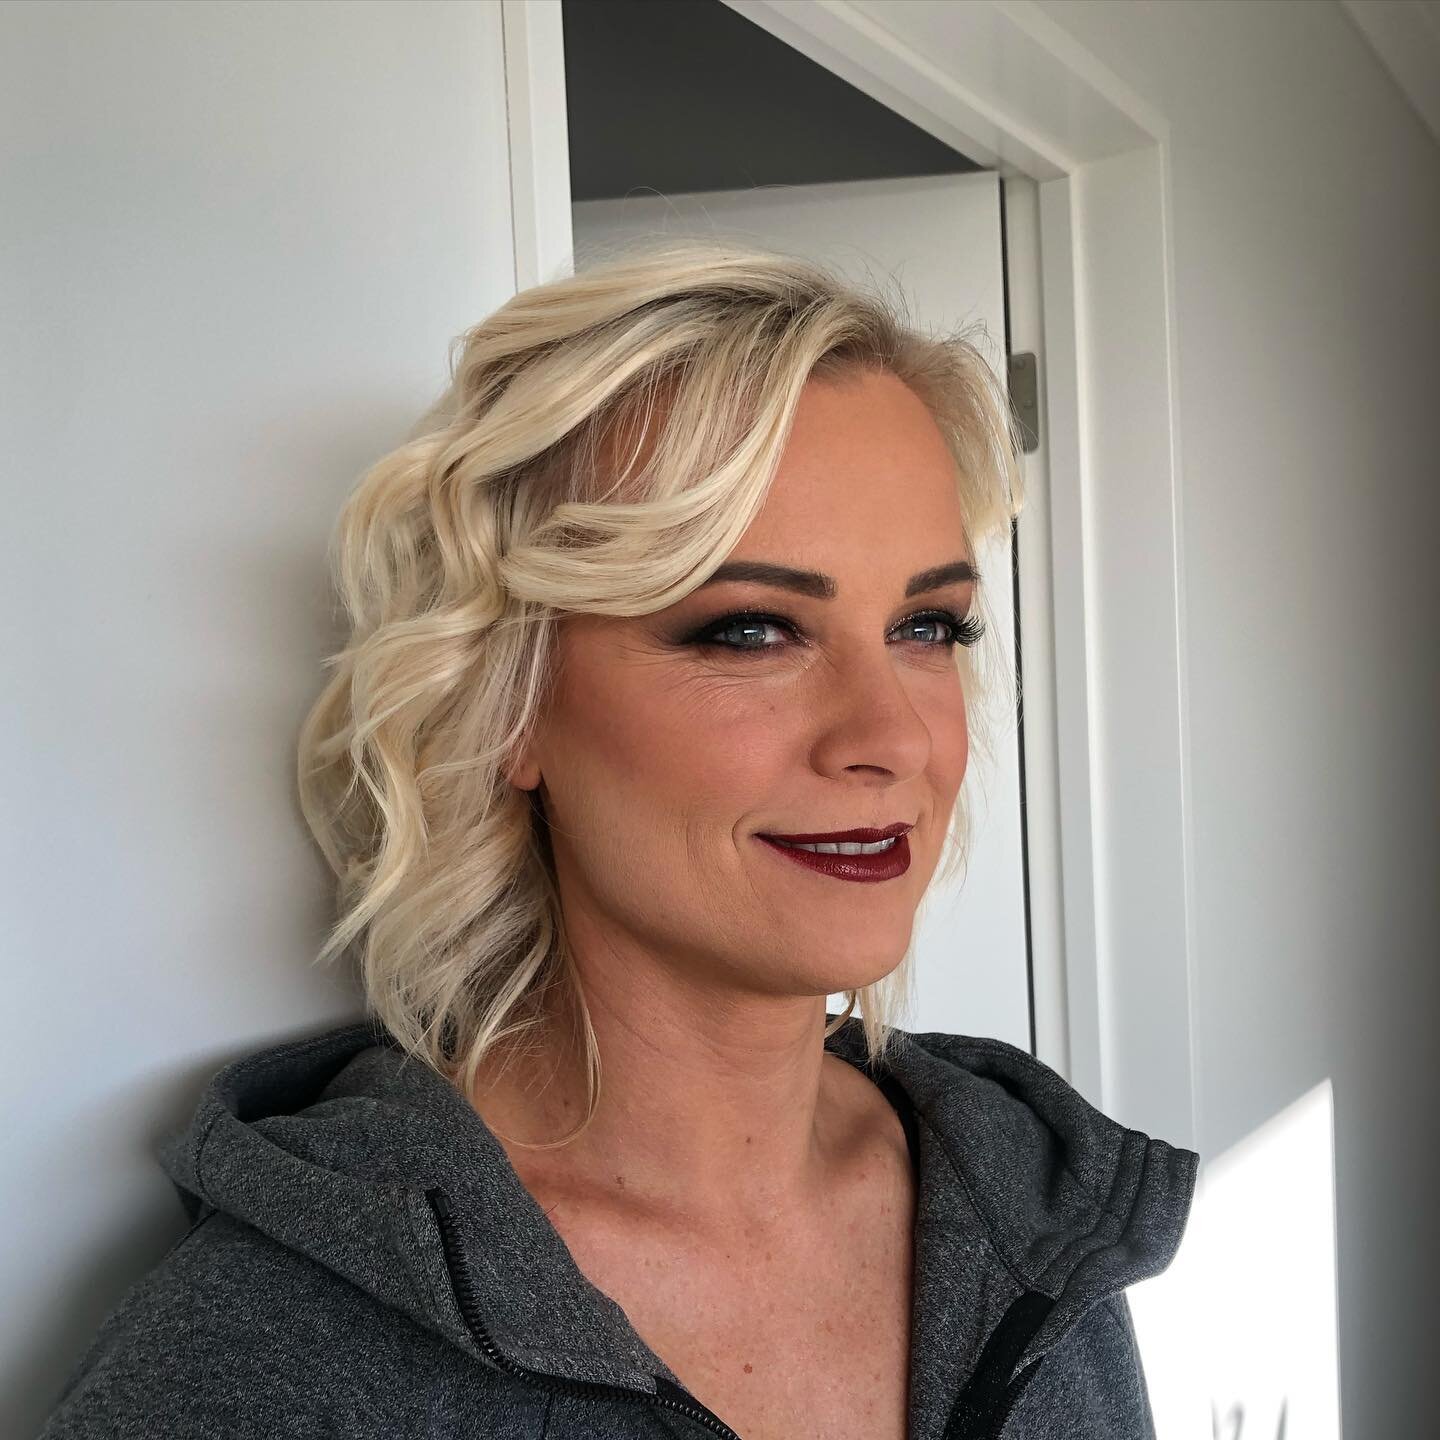 Blonde bombshell 💣 not often I get to do a dark lip, people are so afraid of them! 💄 
 

#makeupartistnz #chchmua #christchurchnz #christchurchmua  #nzmua #nzmakeupartist #nzmakeup #qualifiedmua #nzmakeupartists #nzmakeuppro  #christchurch #chch #m